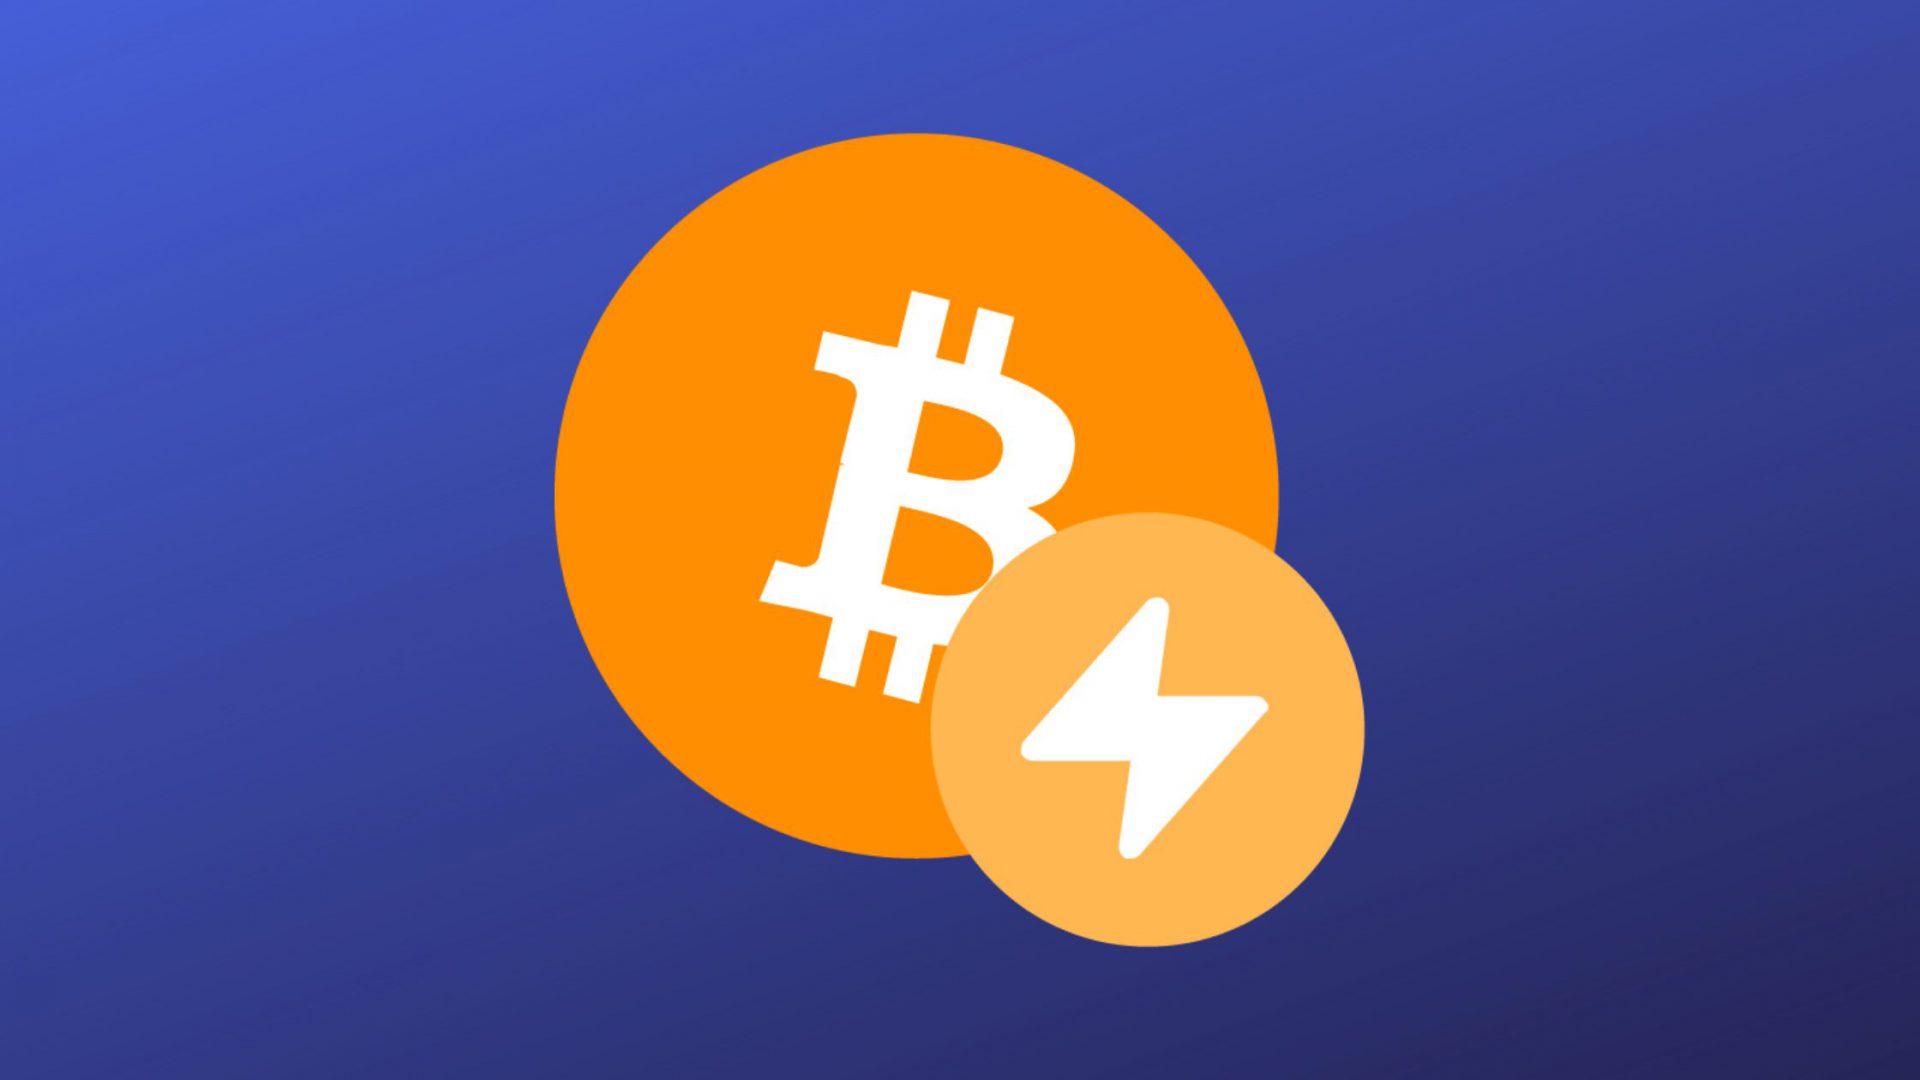 how to use bitcoin lightning network